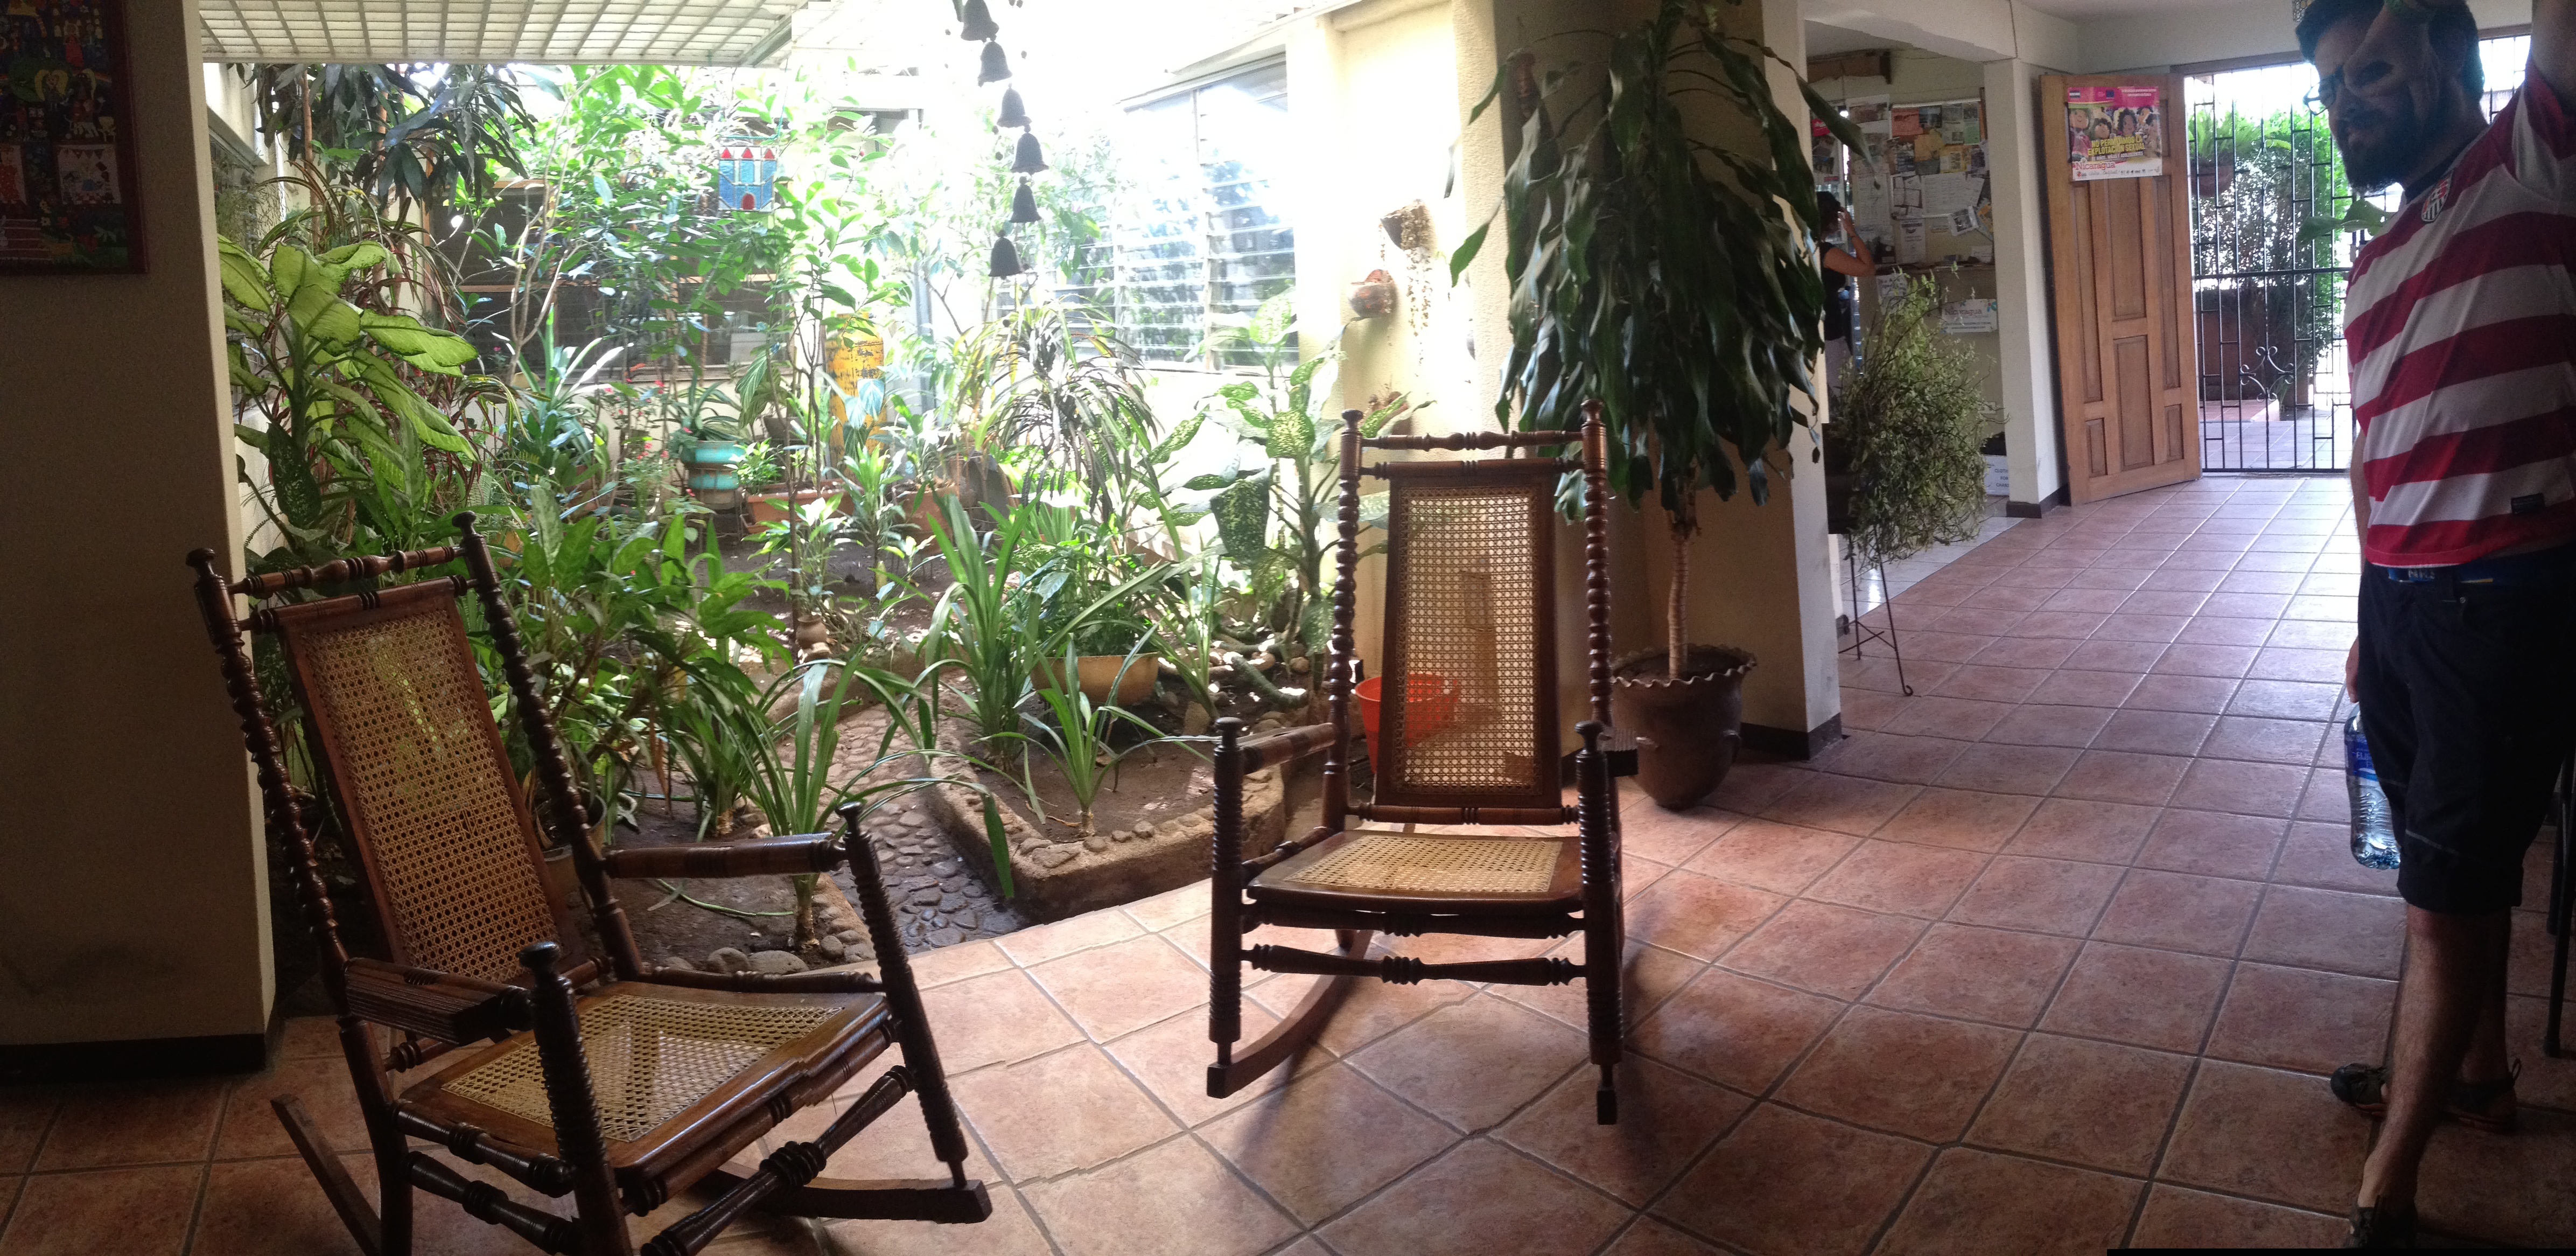 Every house should have a garden area,  at the hostel 